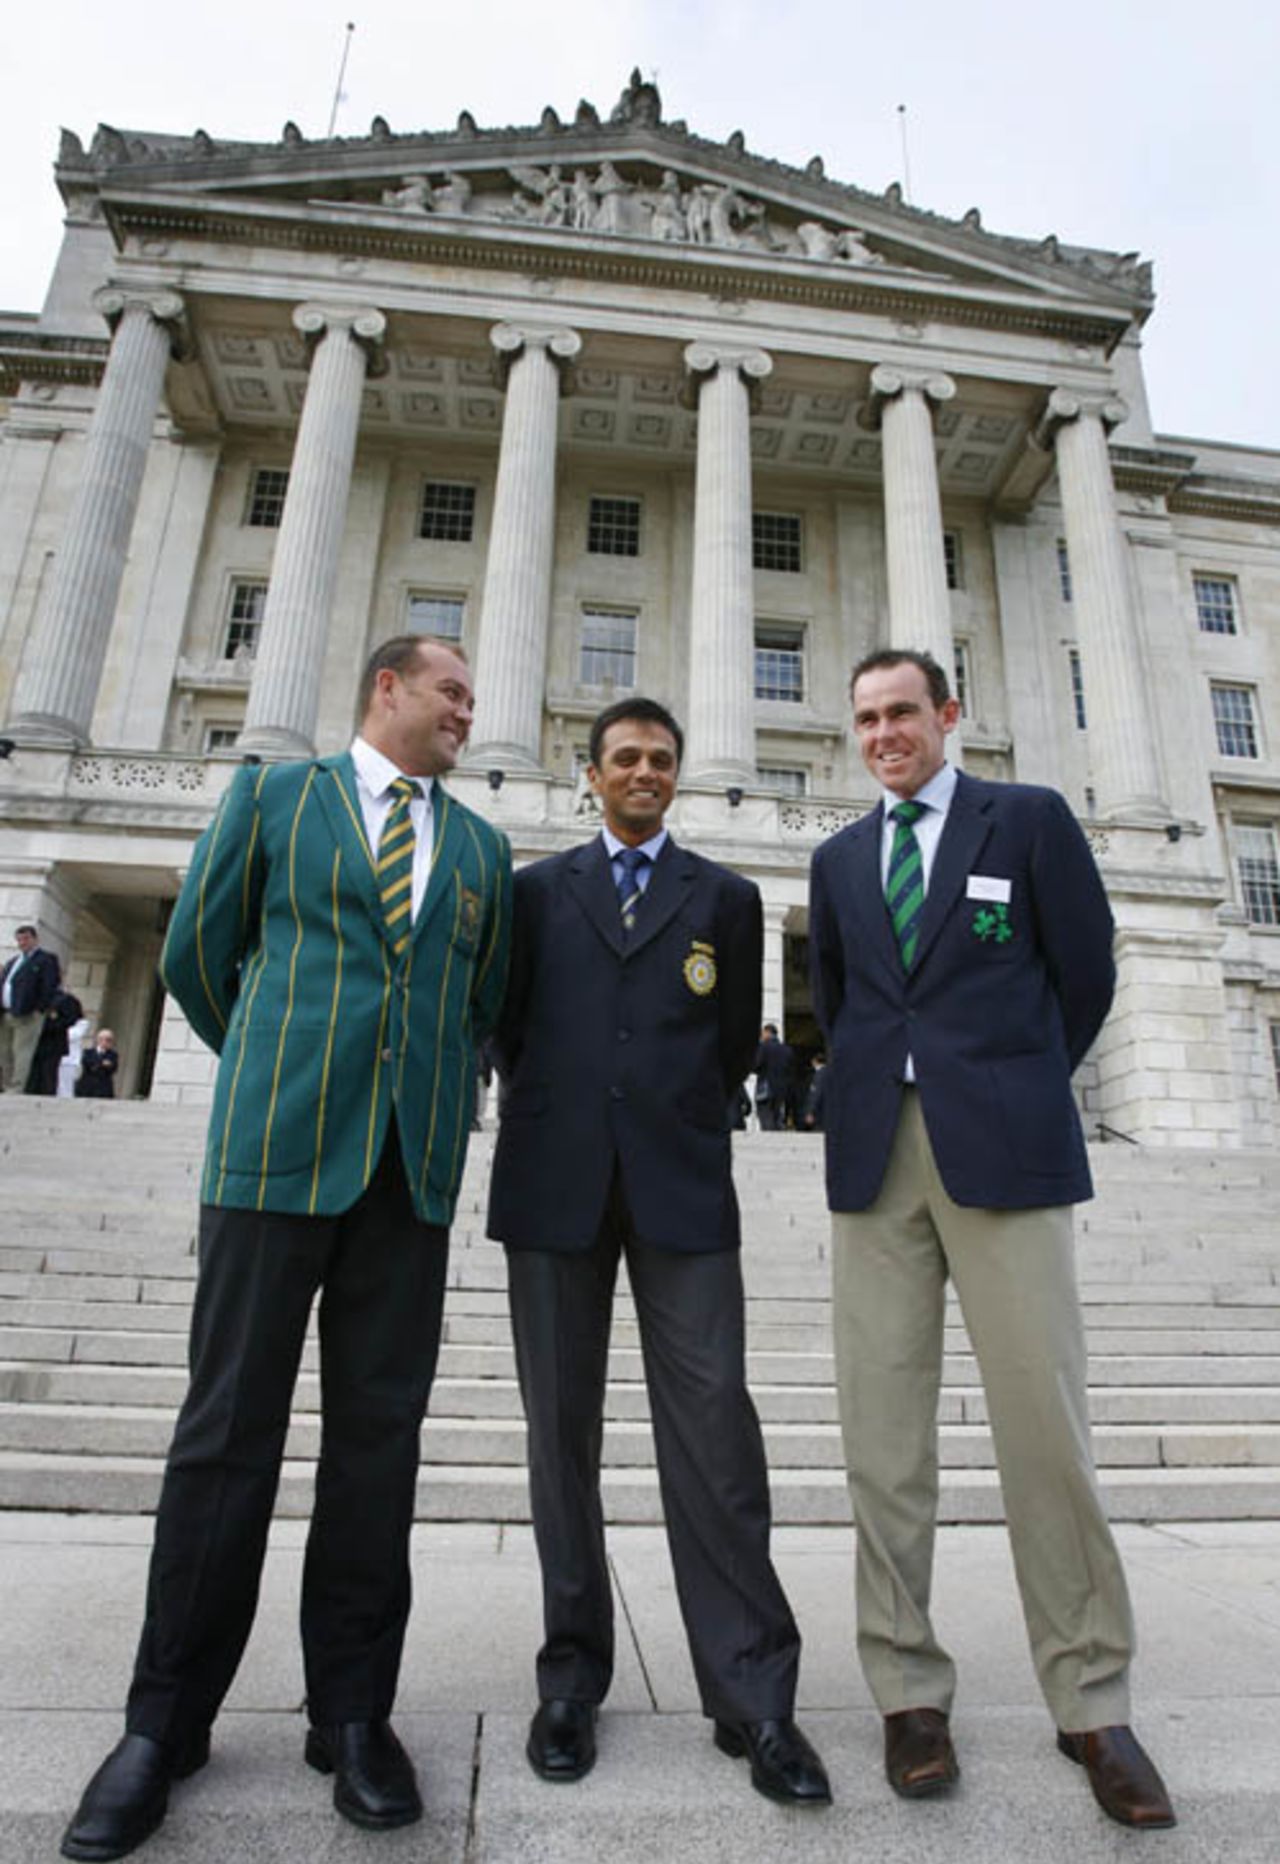 Jacques Kallis, Rahul Dravid and Trent Johnston pose in front of the Stormont Parliament building, Belfast, June 22, 2007